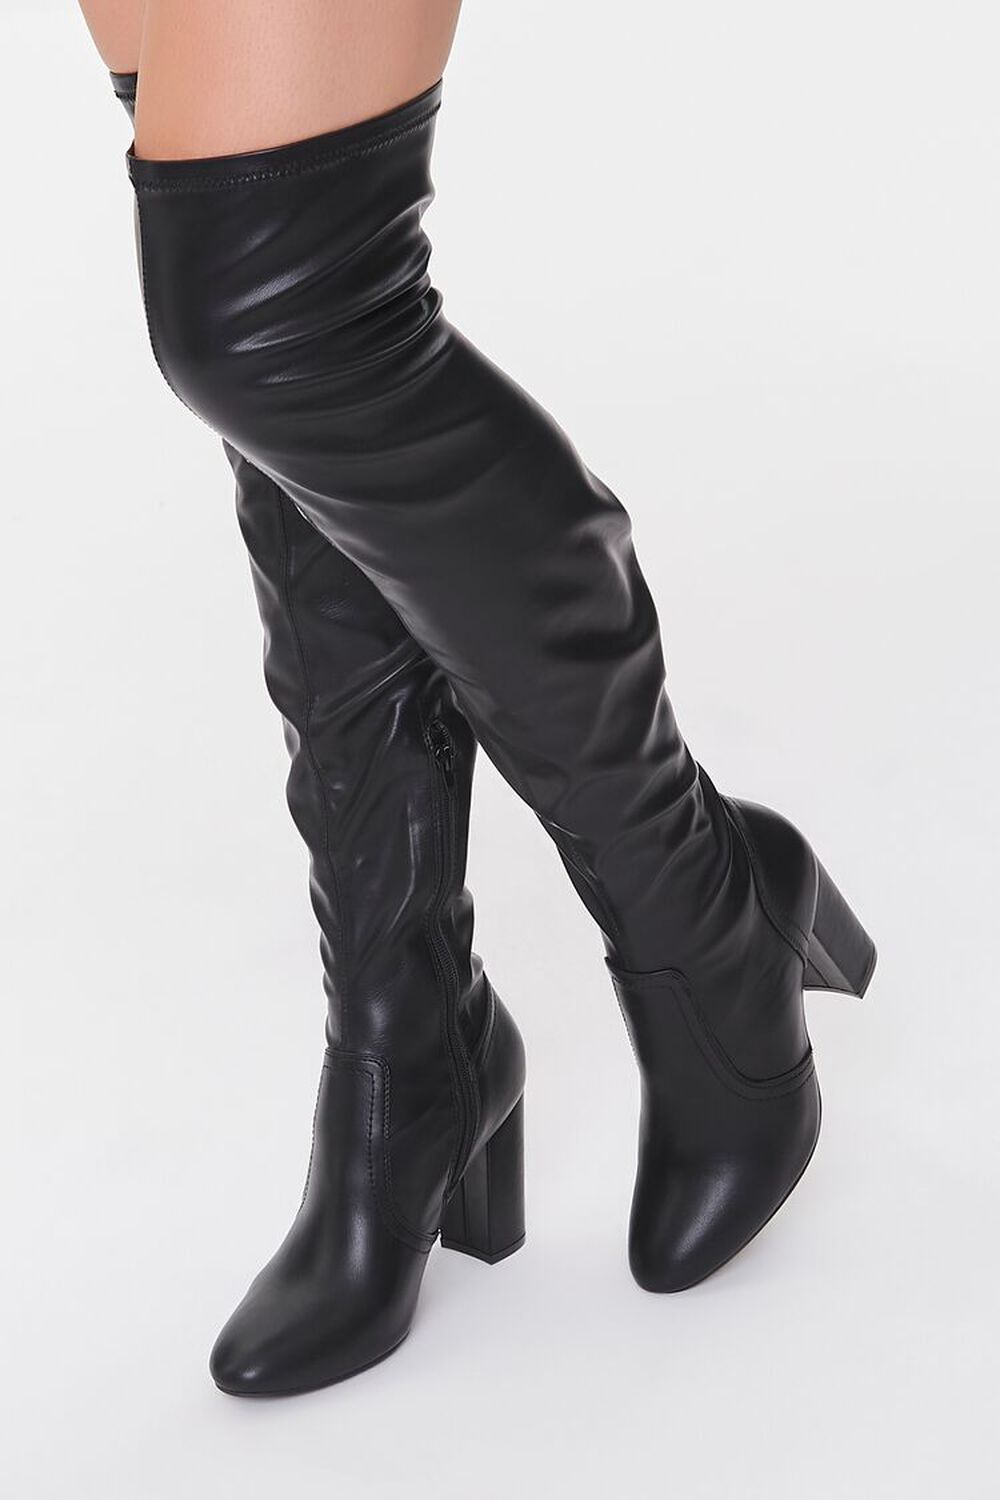 BLACK Faux Leather Thigh-High Boots, image 1